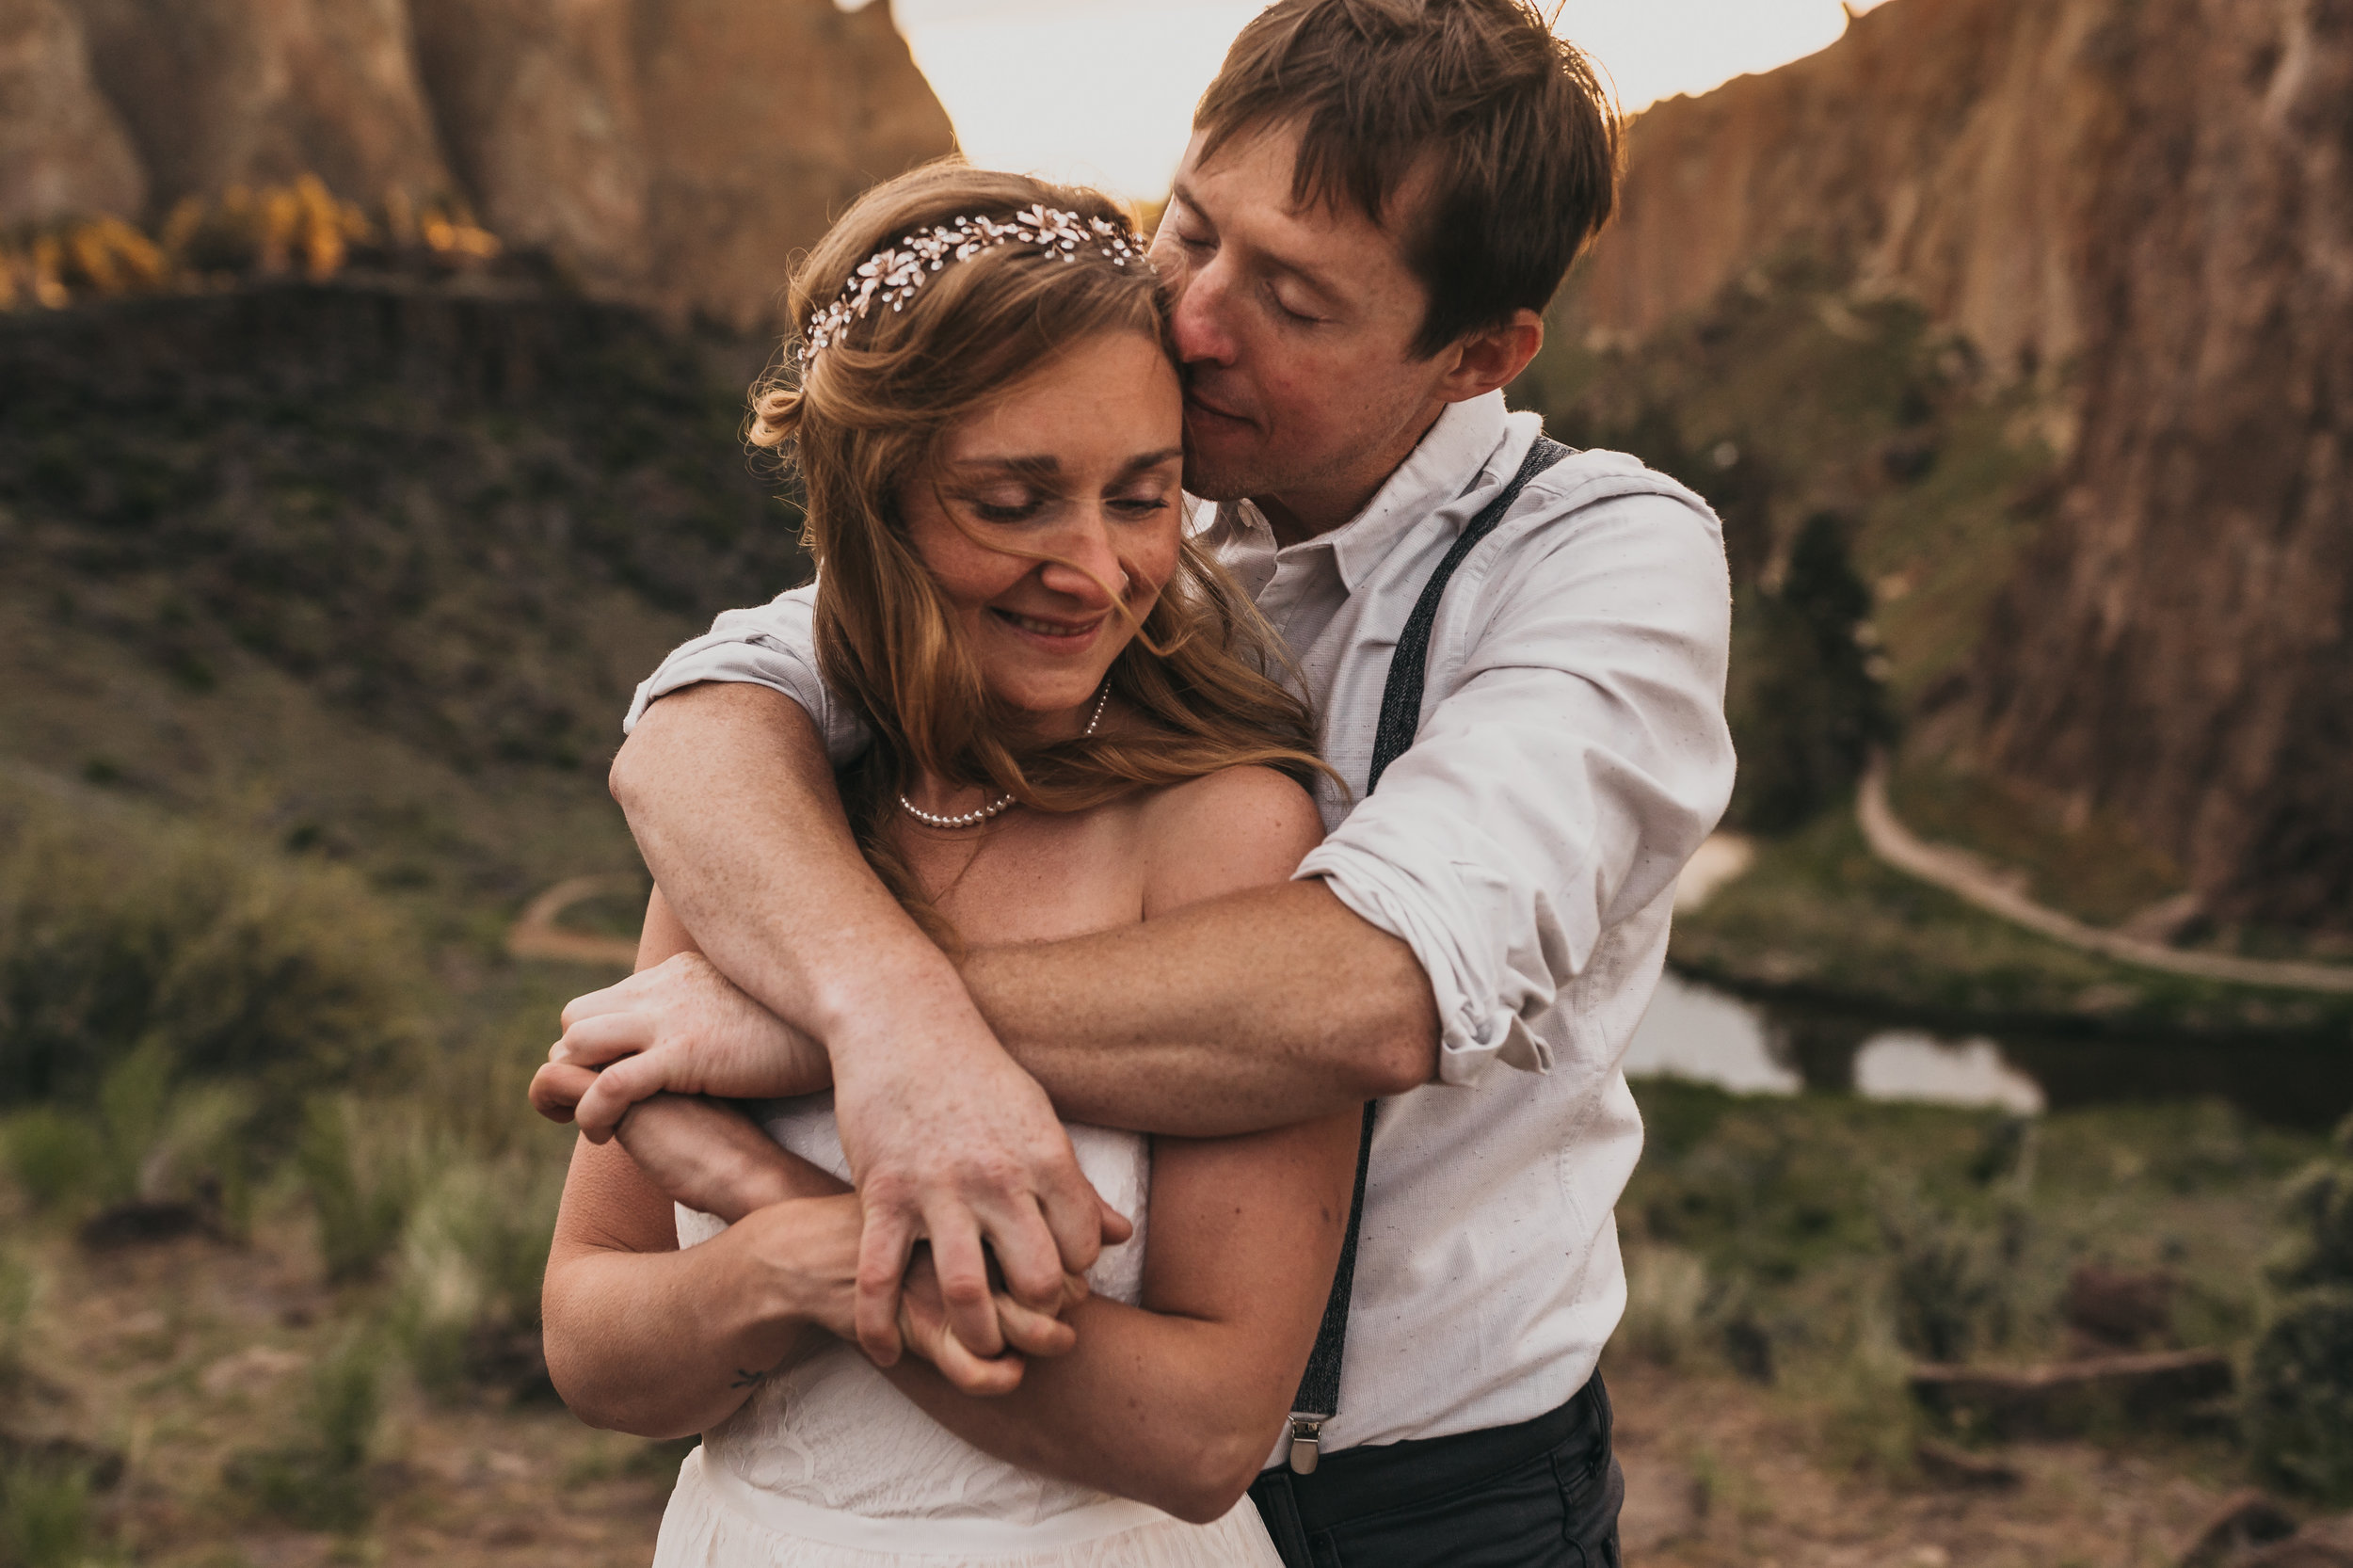 Smith Rock State Park Sunset Photo Session | Between the Pine Adventure Elopement Photography 